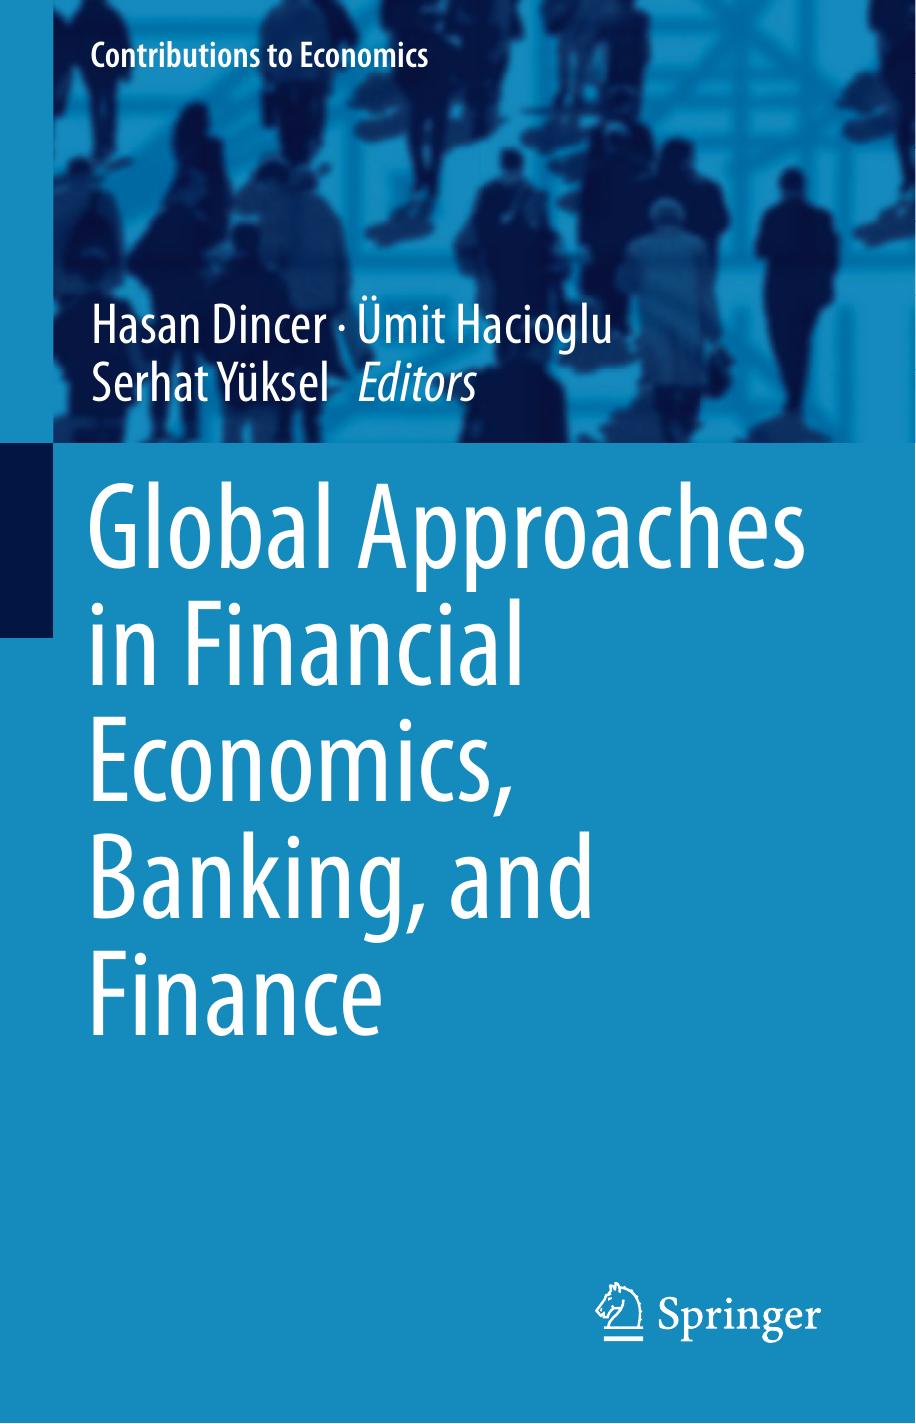 Global Approaches in Financial Economics, Banking, and Finance 2018.pdf